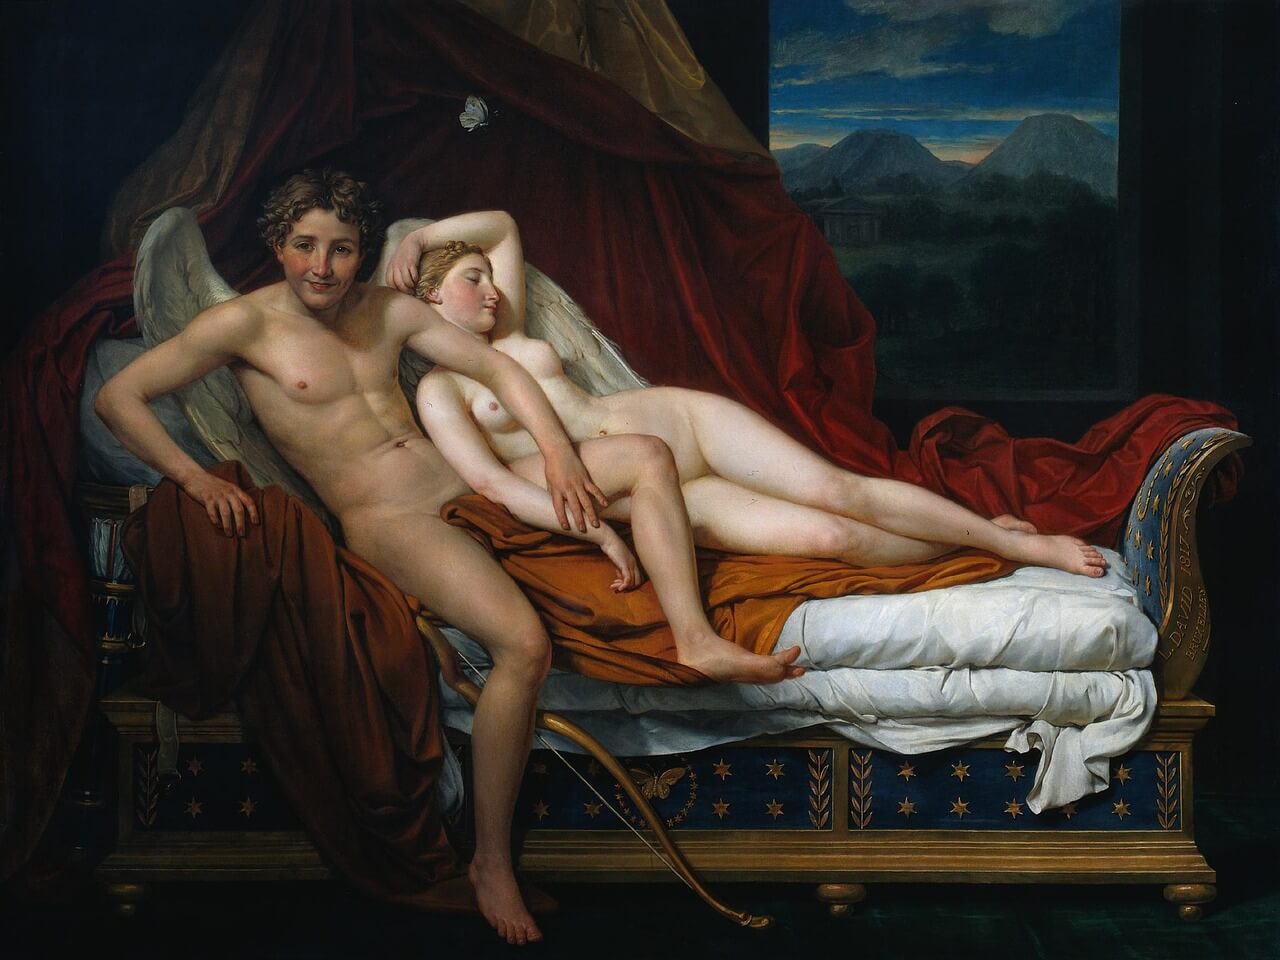 Psyche and Eros